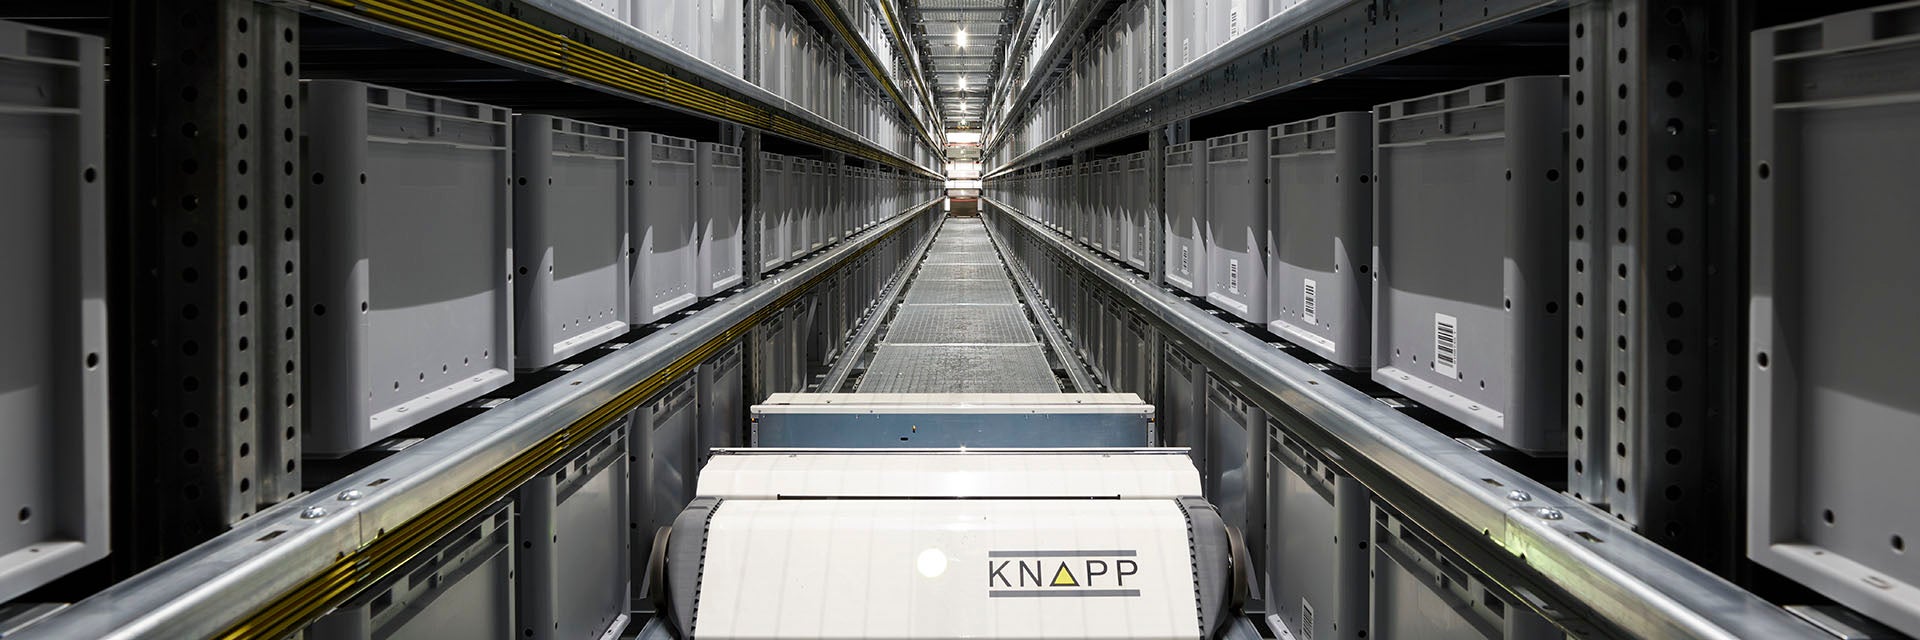 Knapp, our automation system